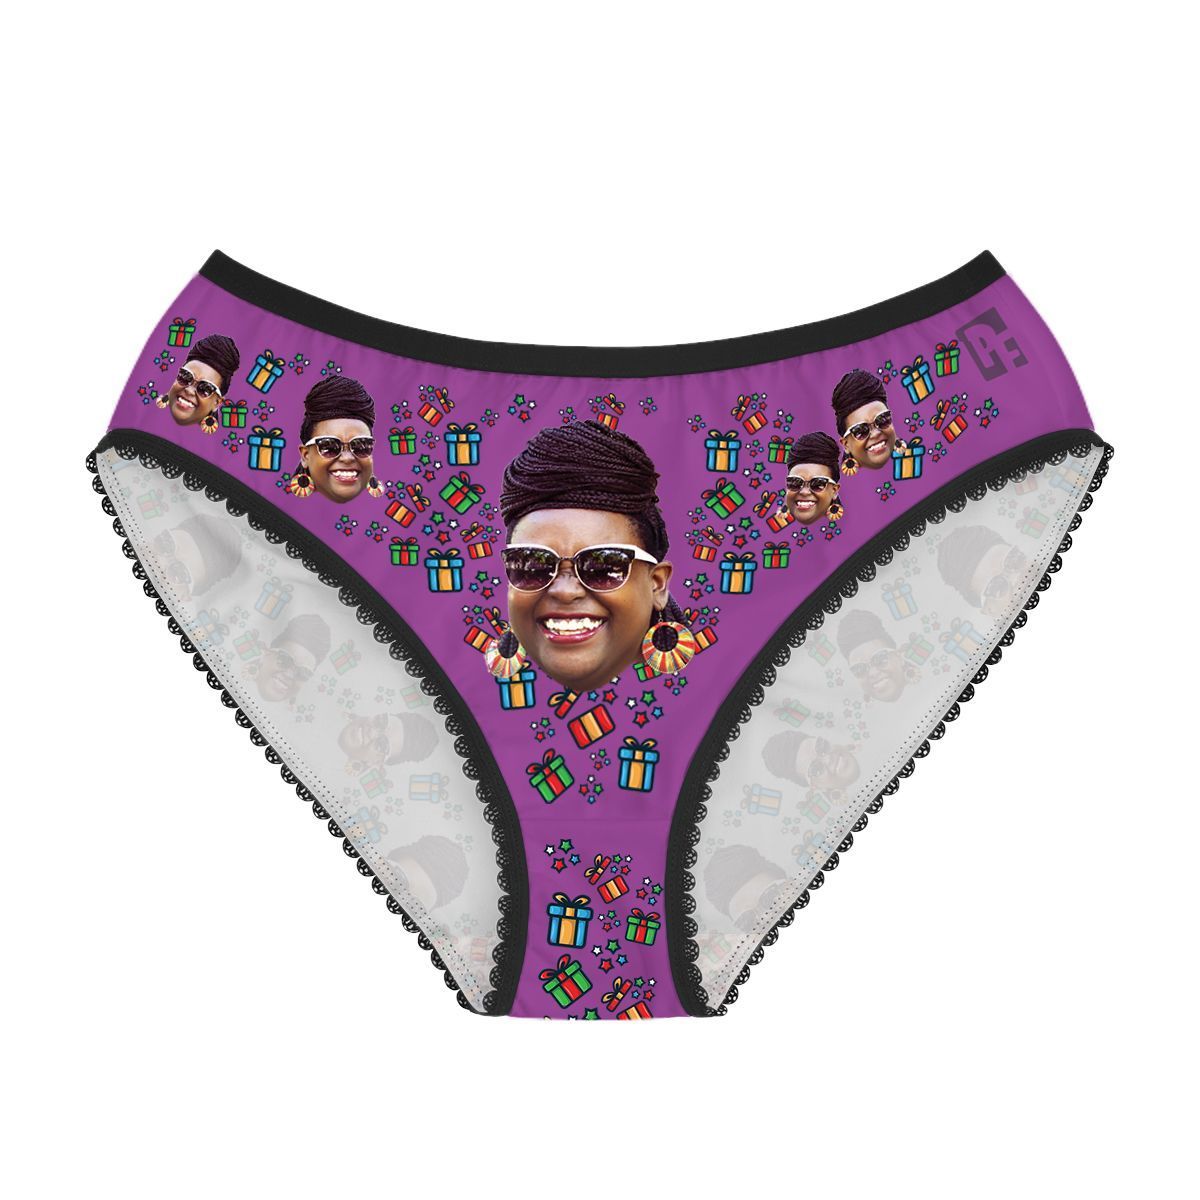 Purple Gift Box women's underwear briefs personalized with photo printed on them